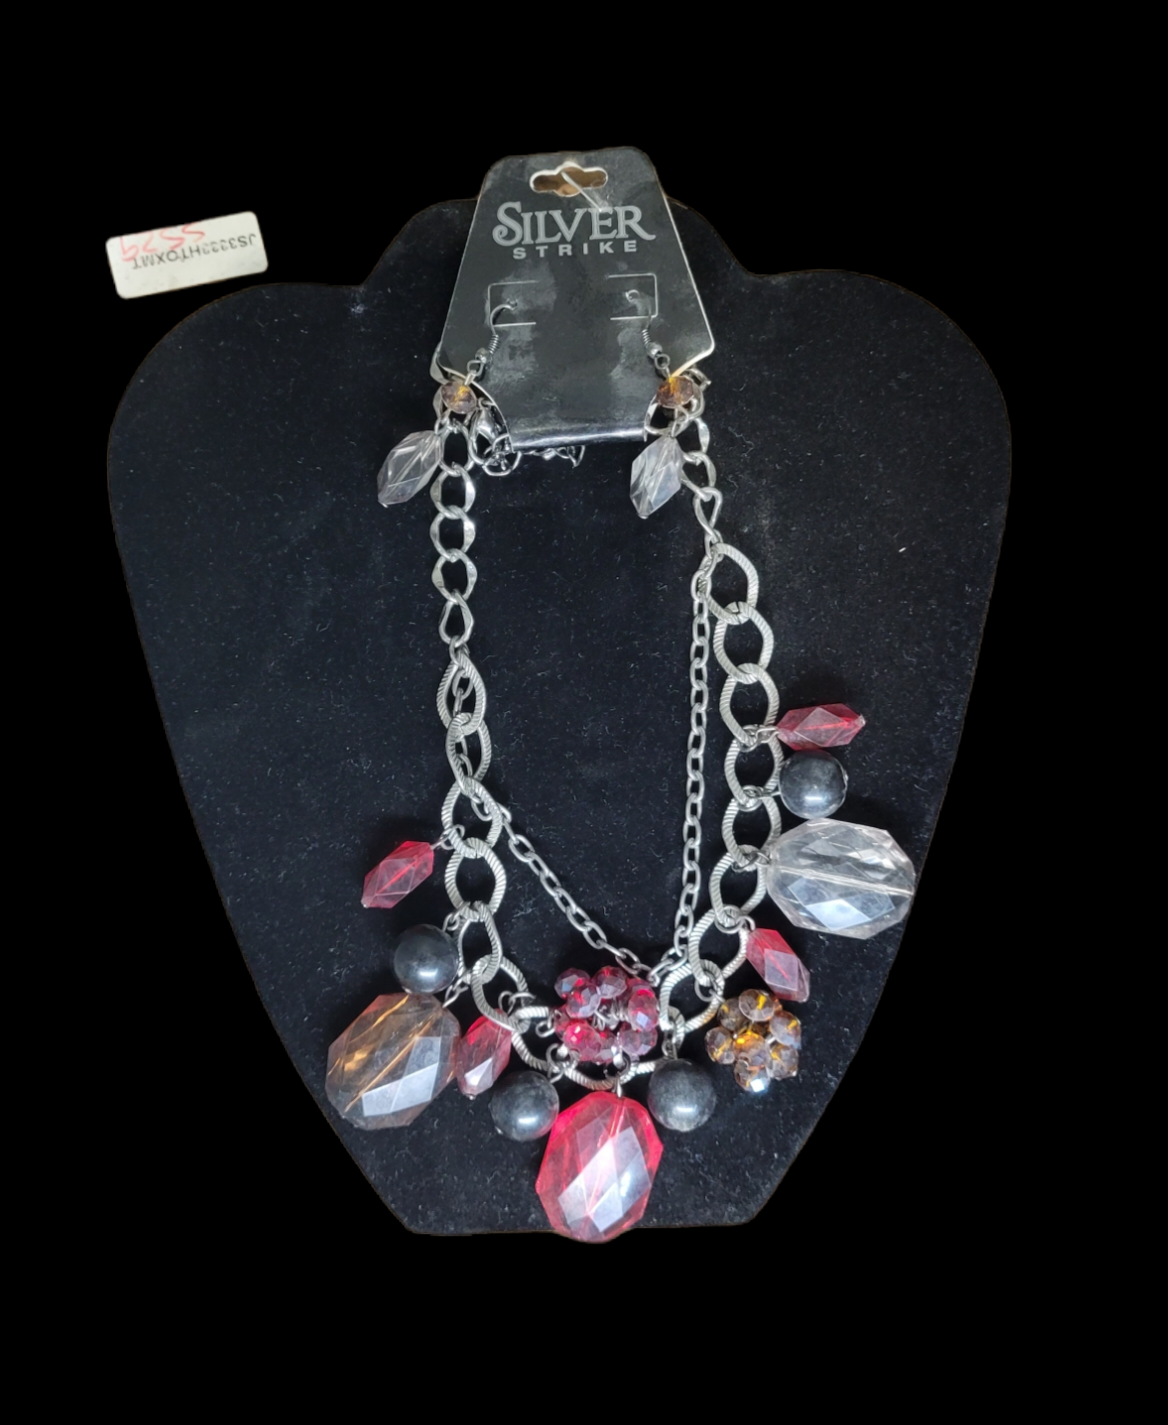 Silver Strike Gem and Charm Chain necklace w/earrings